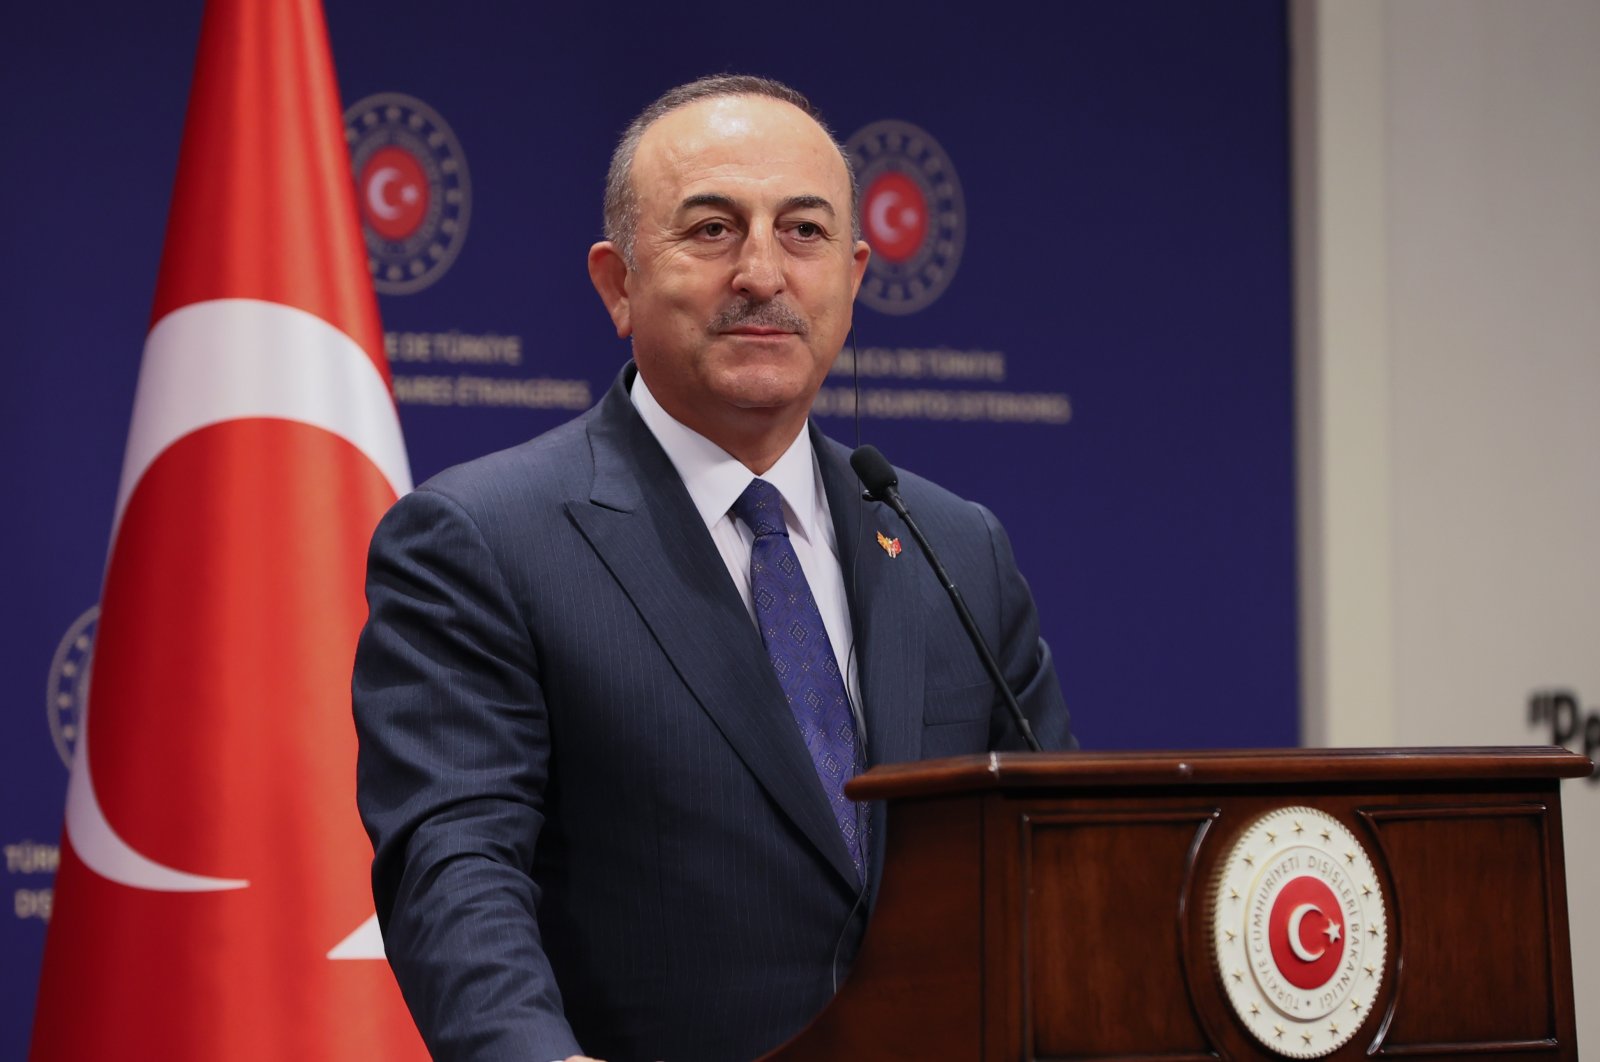 Foreign Minister Mevlüt Çavuşoğlu speaks during a joint news conference with his North Macedonian counterpart Bujar Osmani in the capital Ankara, Turkey, June 7, 2022. (AA)